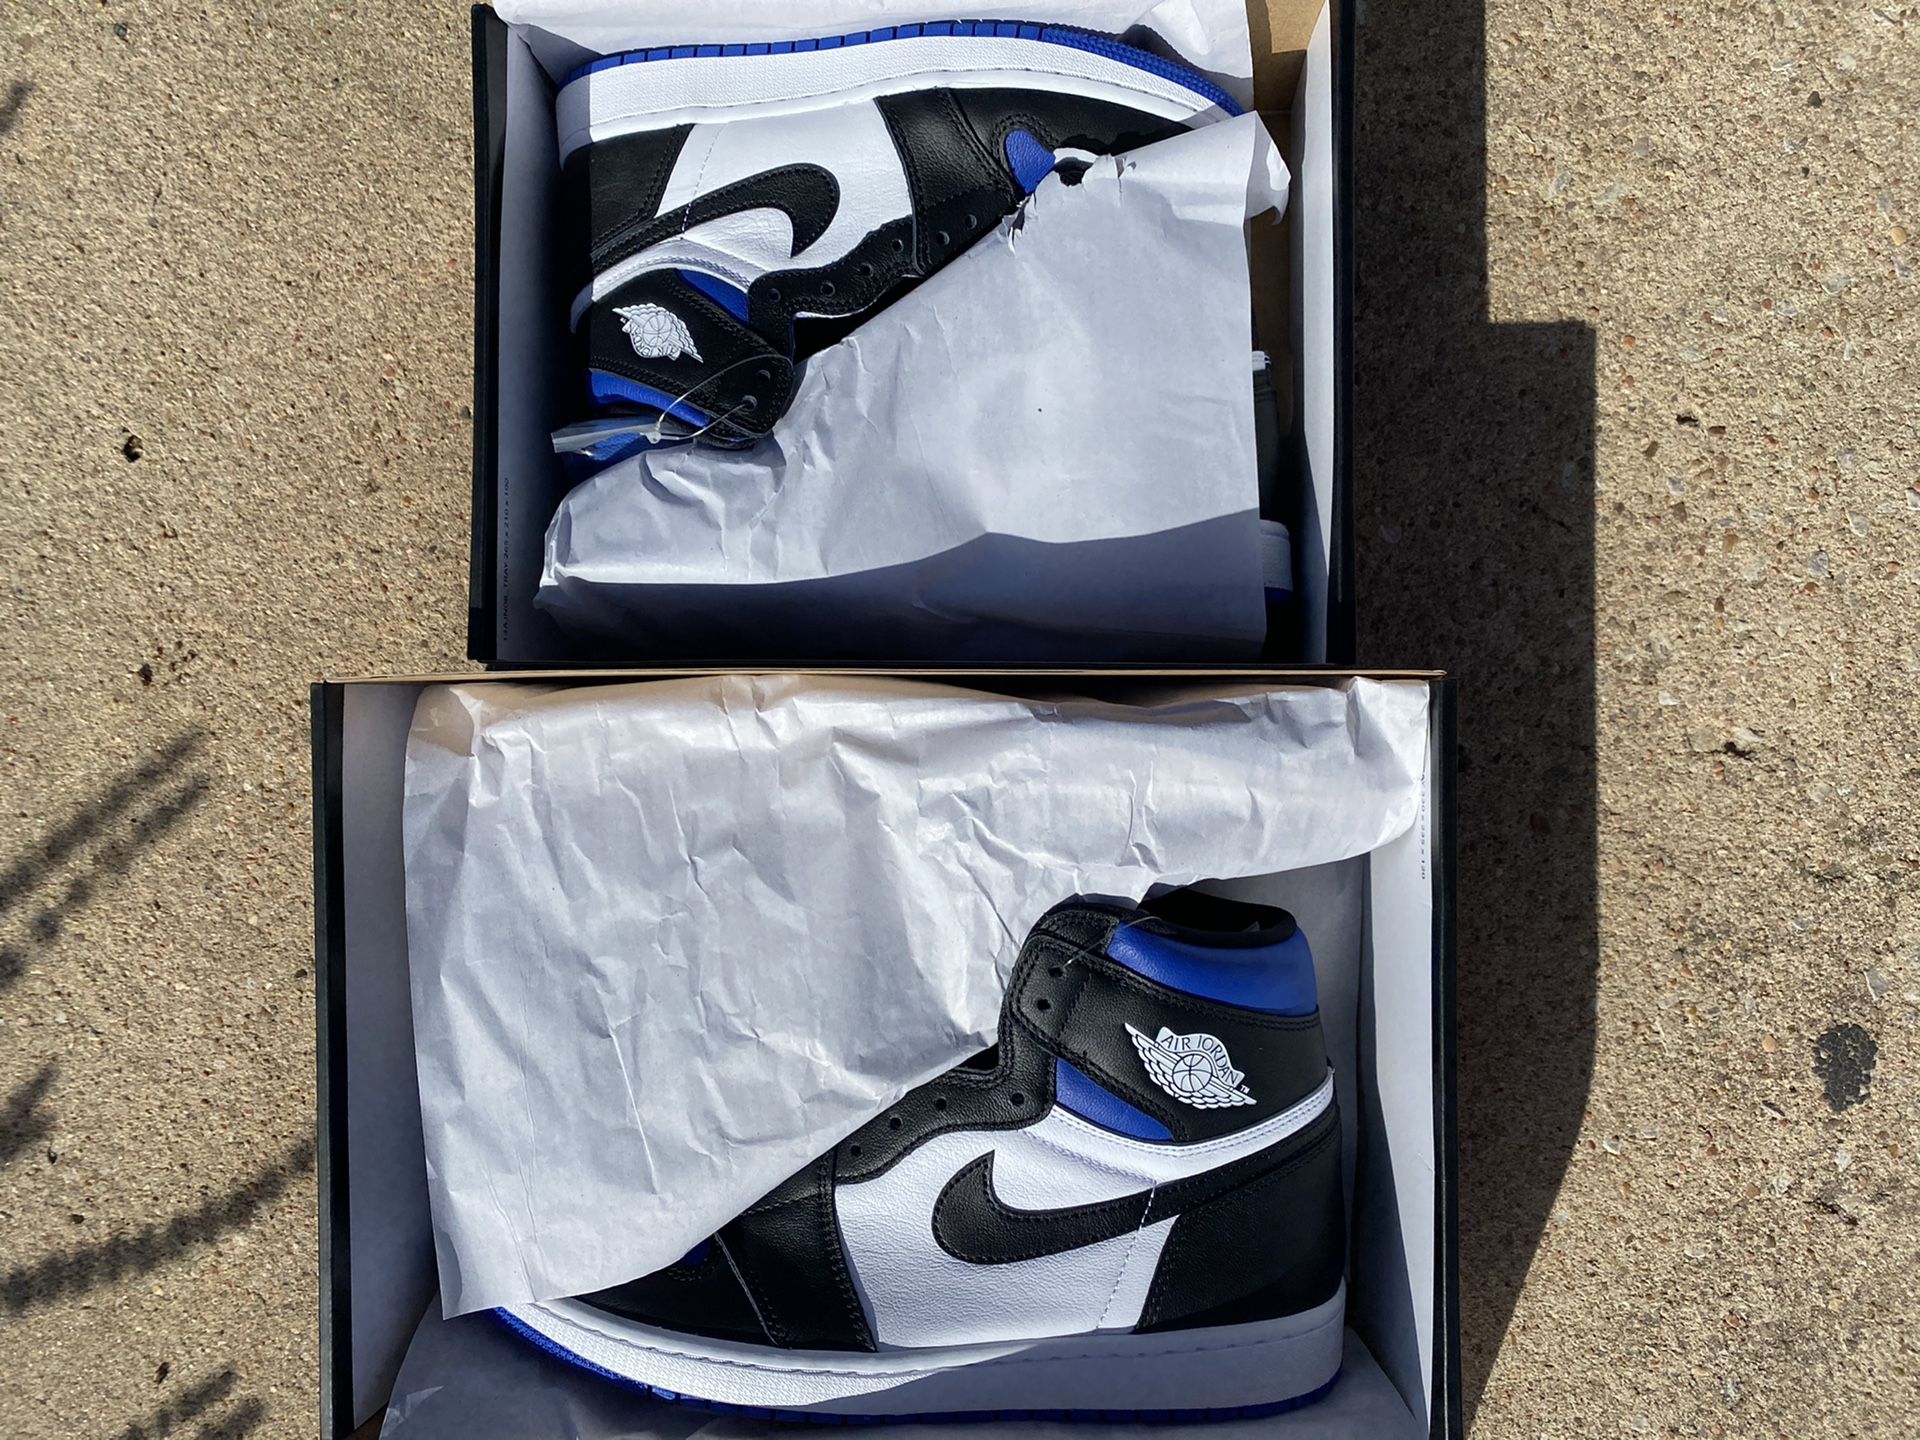 Jordan 1 Royal toes, gs 4y and men’s 12 message for more pics